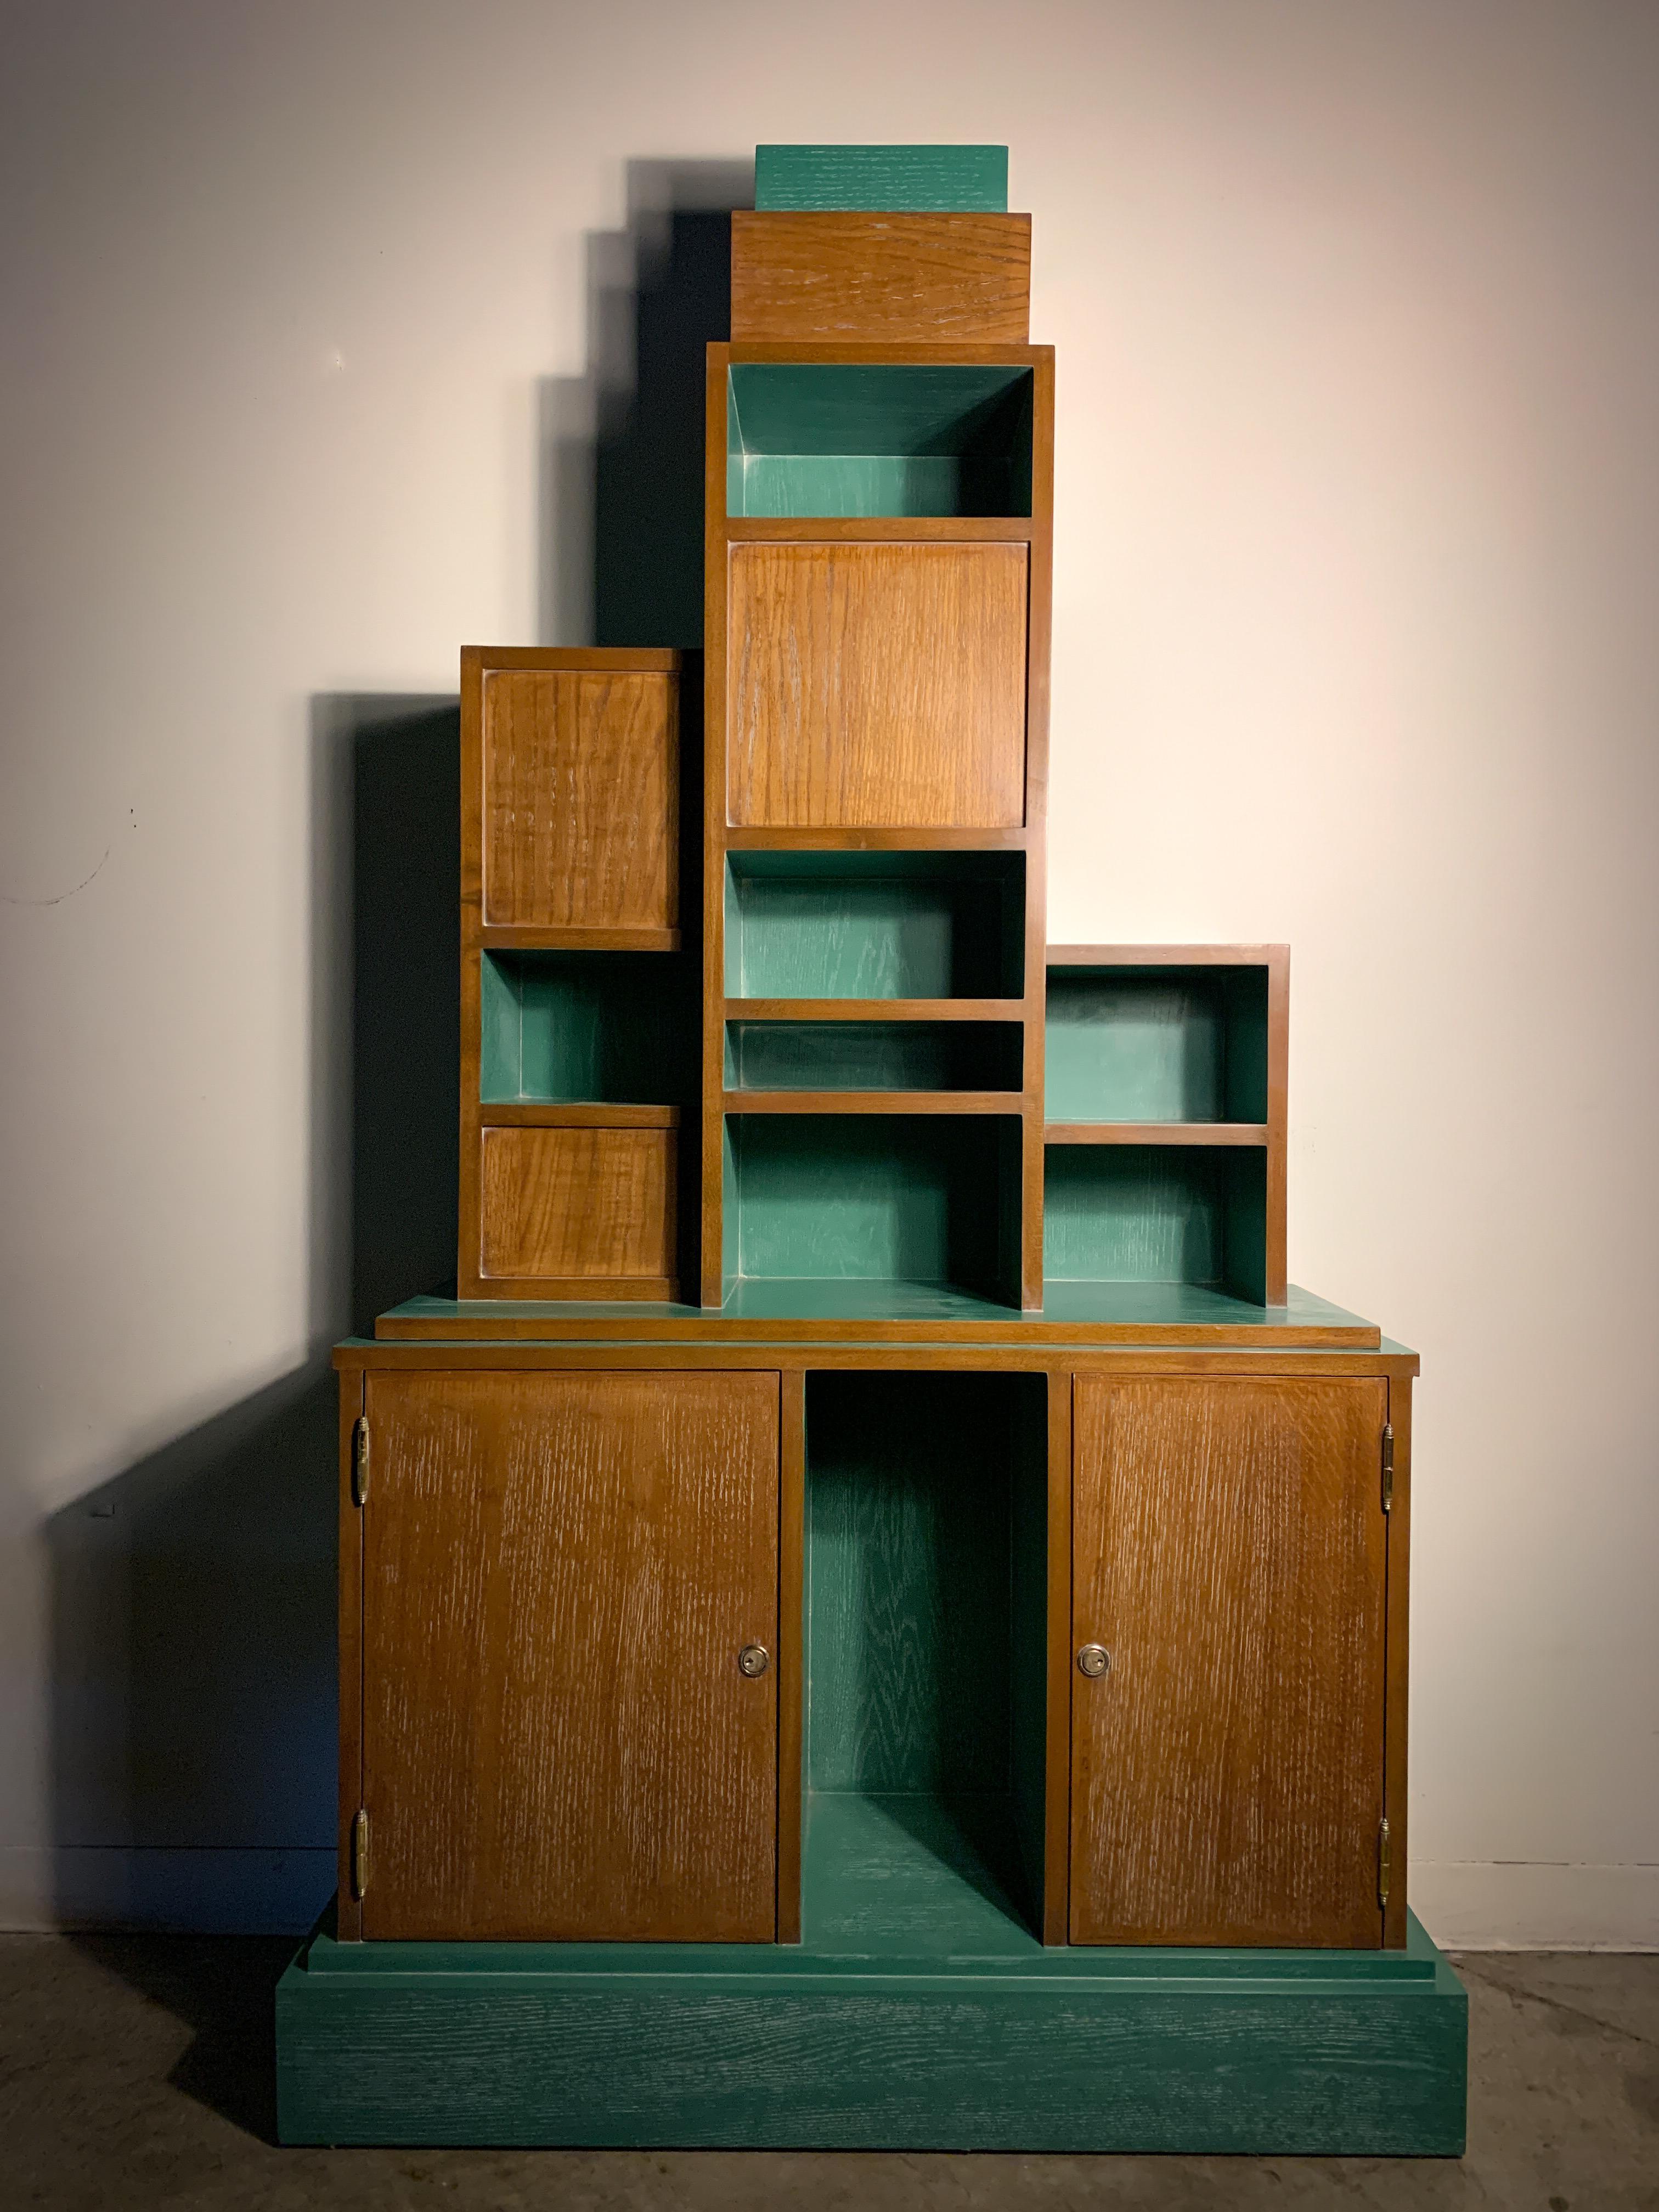 This is a superb vintage bookcase in the style of Paul Frankl's iconic 'Skyscraper Furniture' of the 1920s. Frankl was a pioneer in introducing ideas of modernism to the USA. This bookcase design was a solution for storing his many large form books